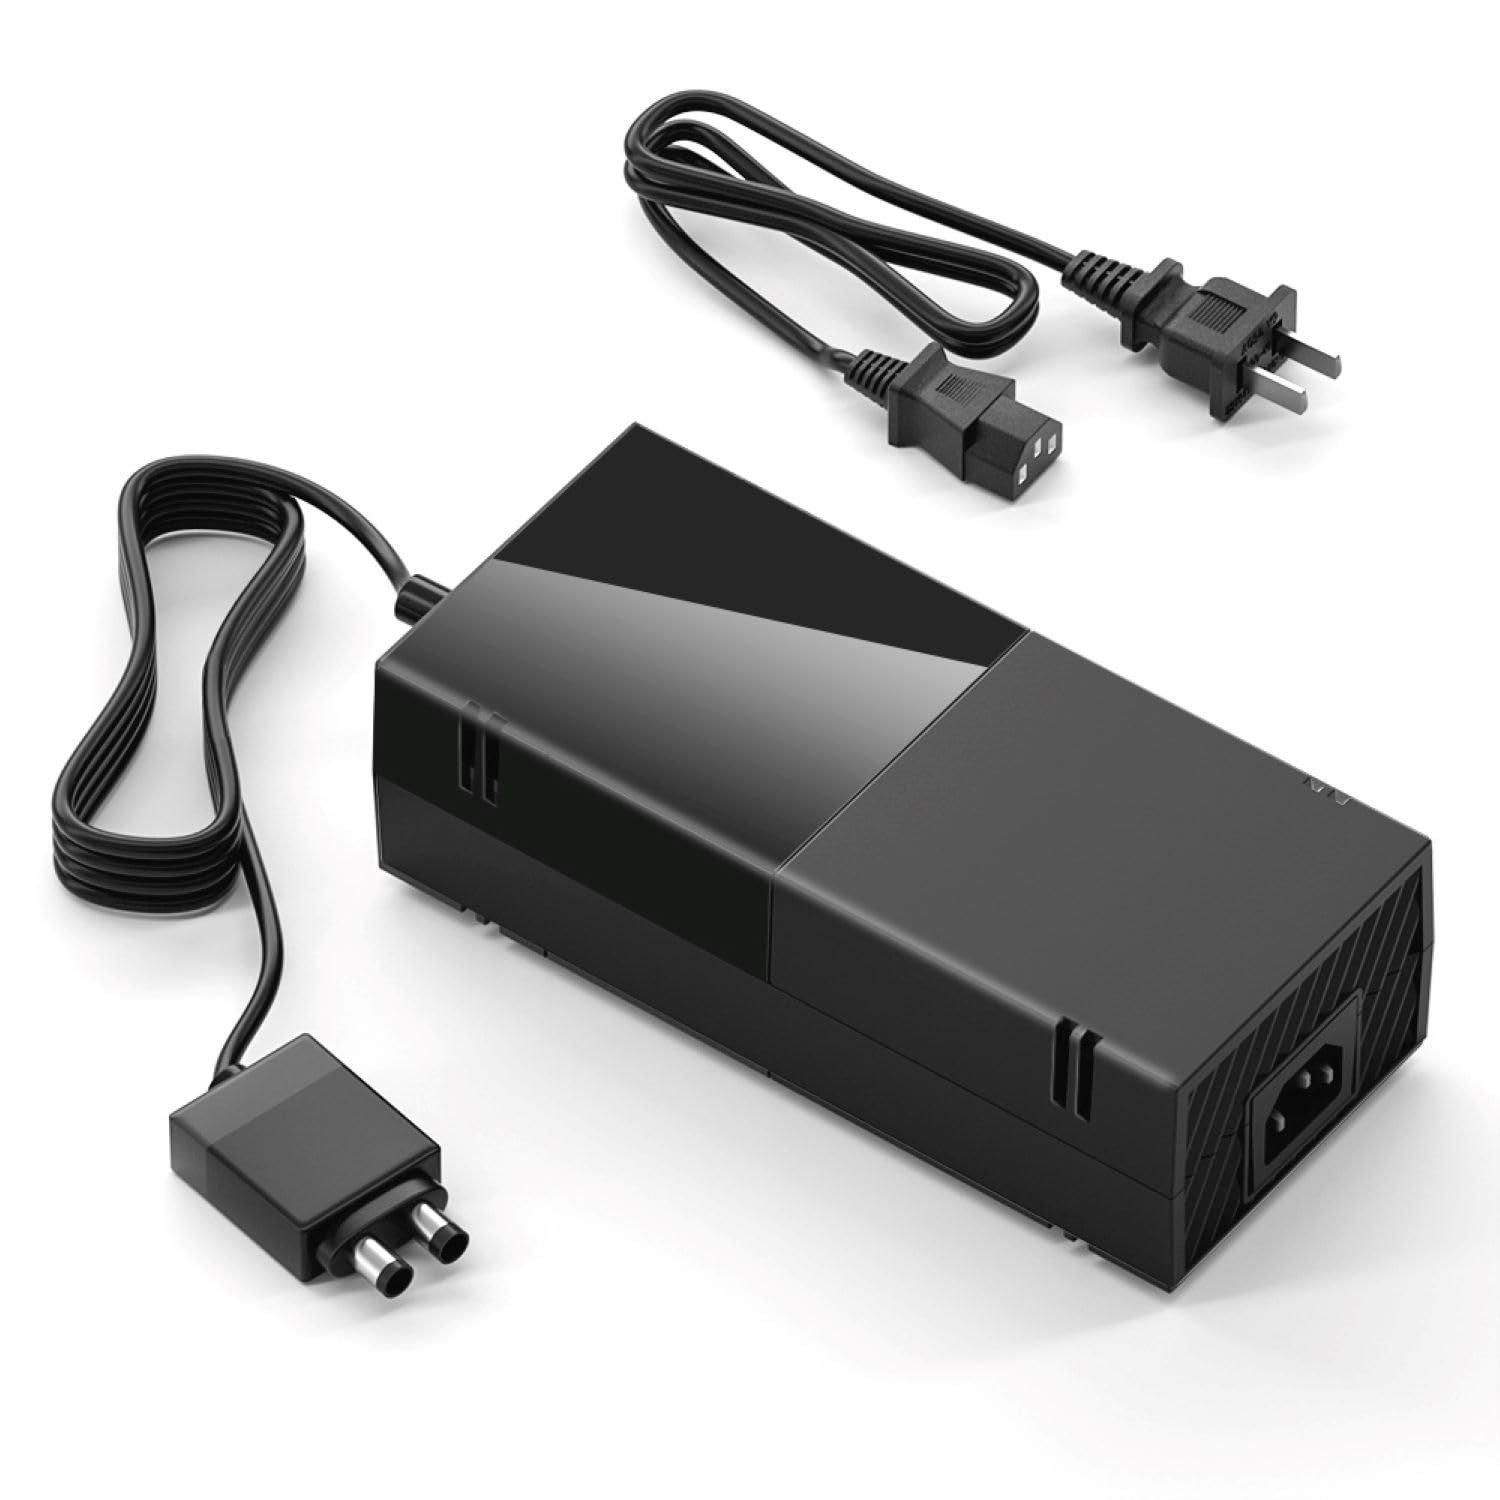 Obtain a different power cord that is compatible with the Xbox.
Unplug the current power cord from both the Xbox and the power outlet.